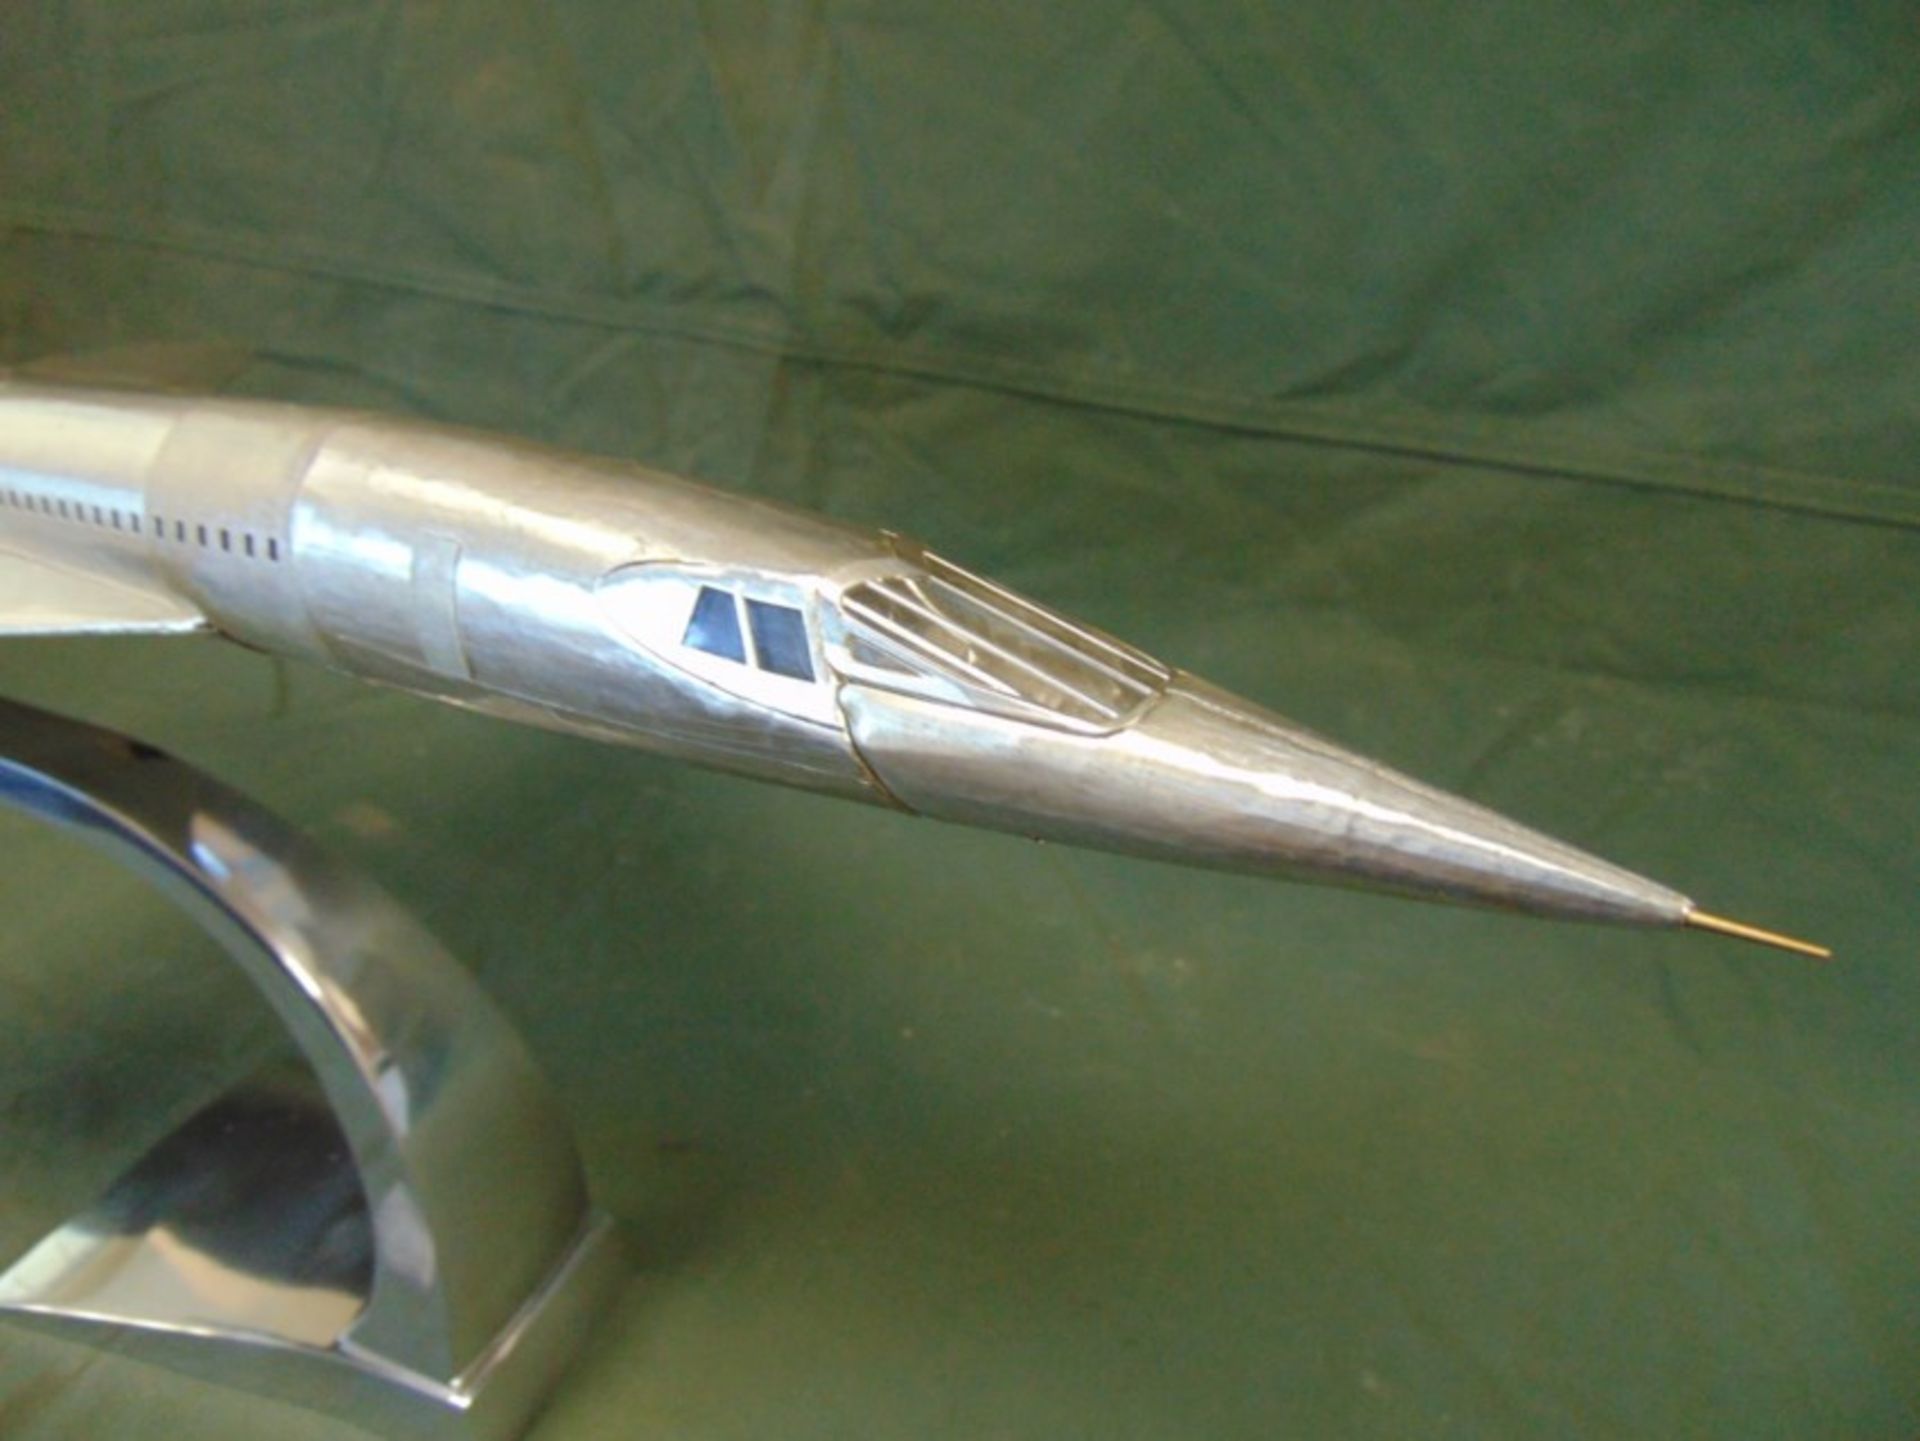 NEW JUST LANDED Large Aluminium Concorde Model - Image 6 of 14